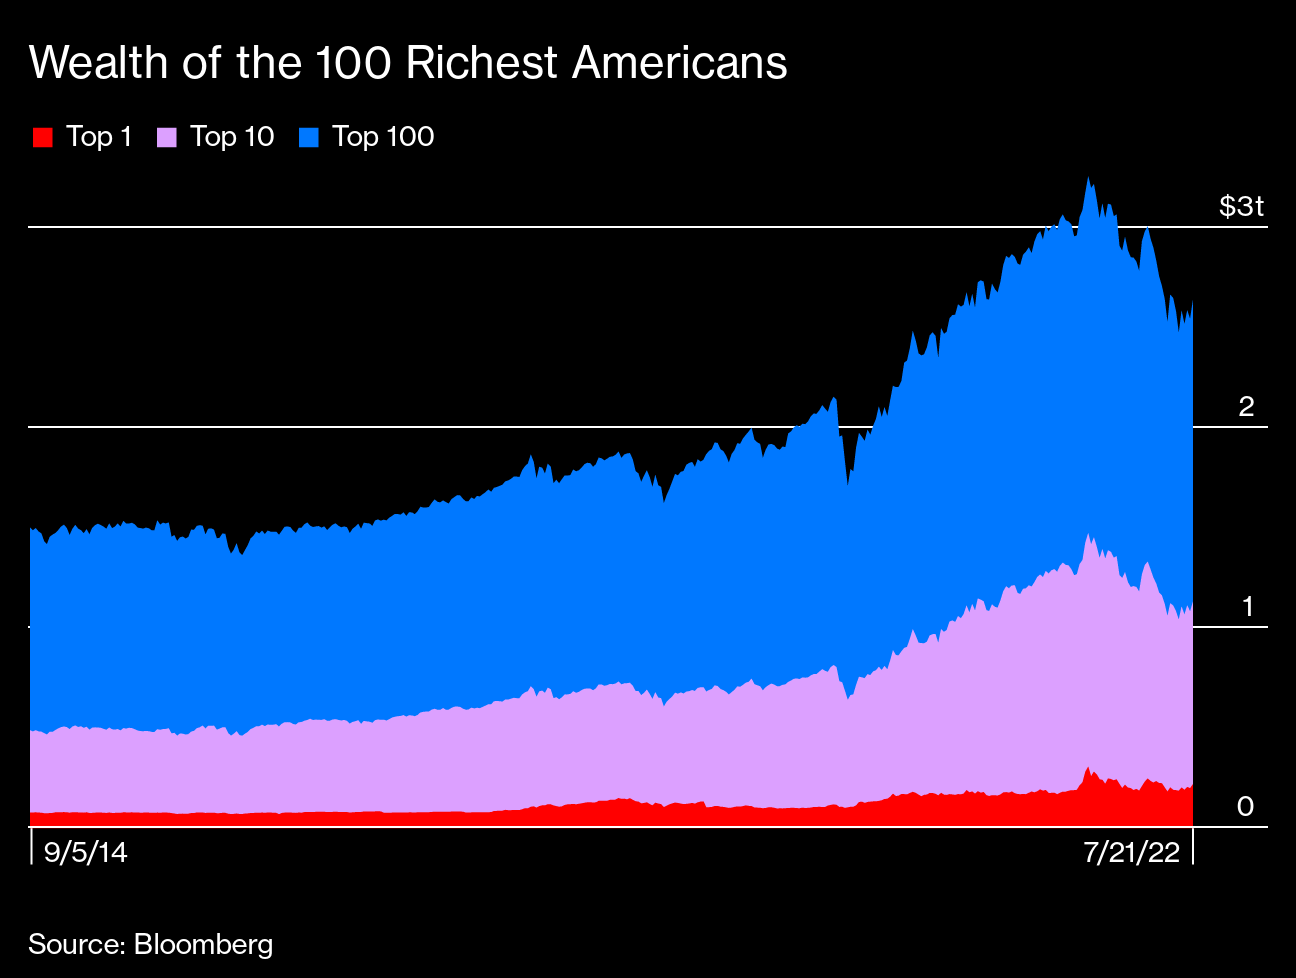 How Much Have the Richest Americans Lost in 2022? Over $600 Billion Bloomberg